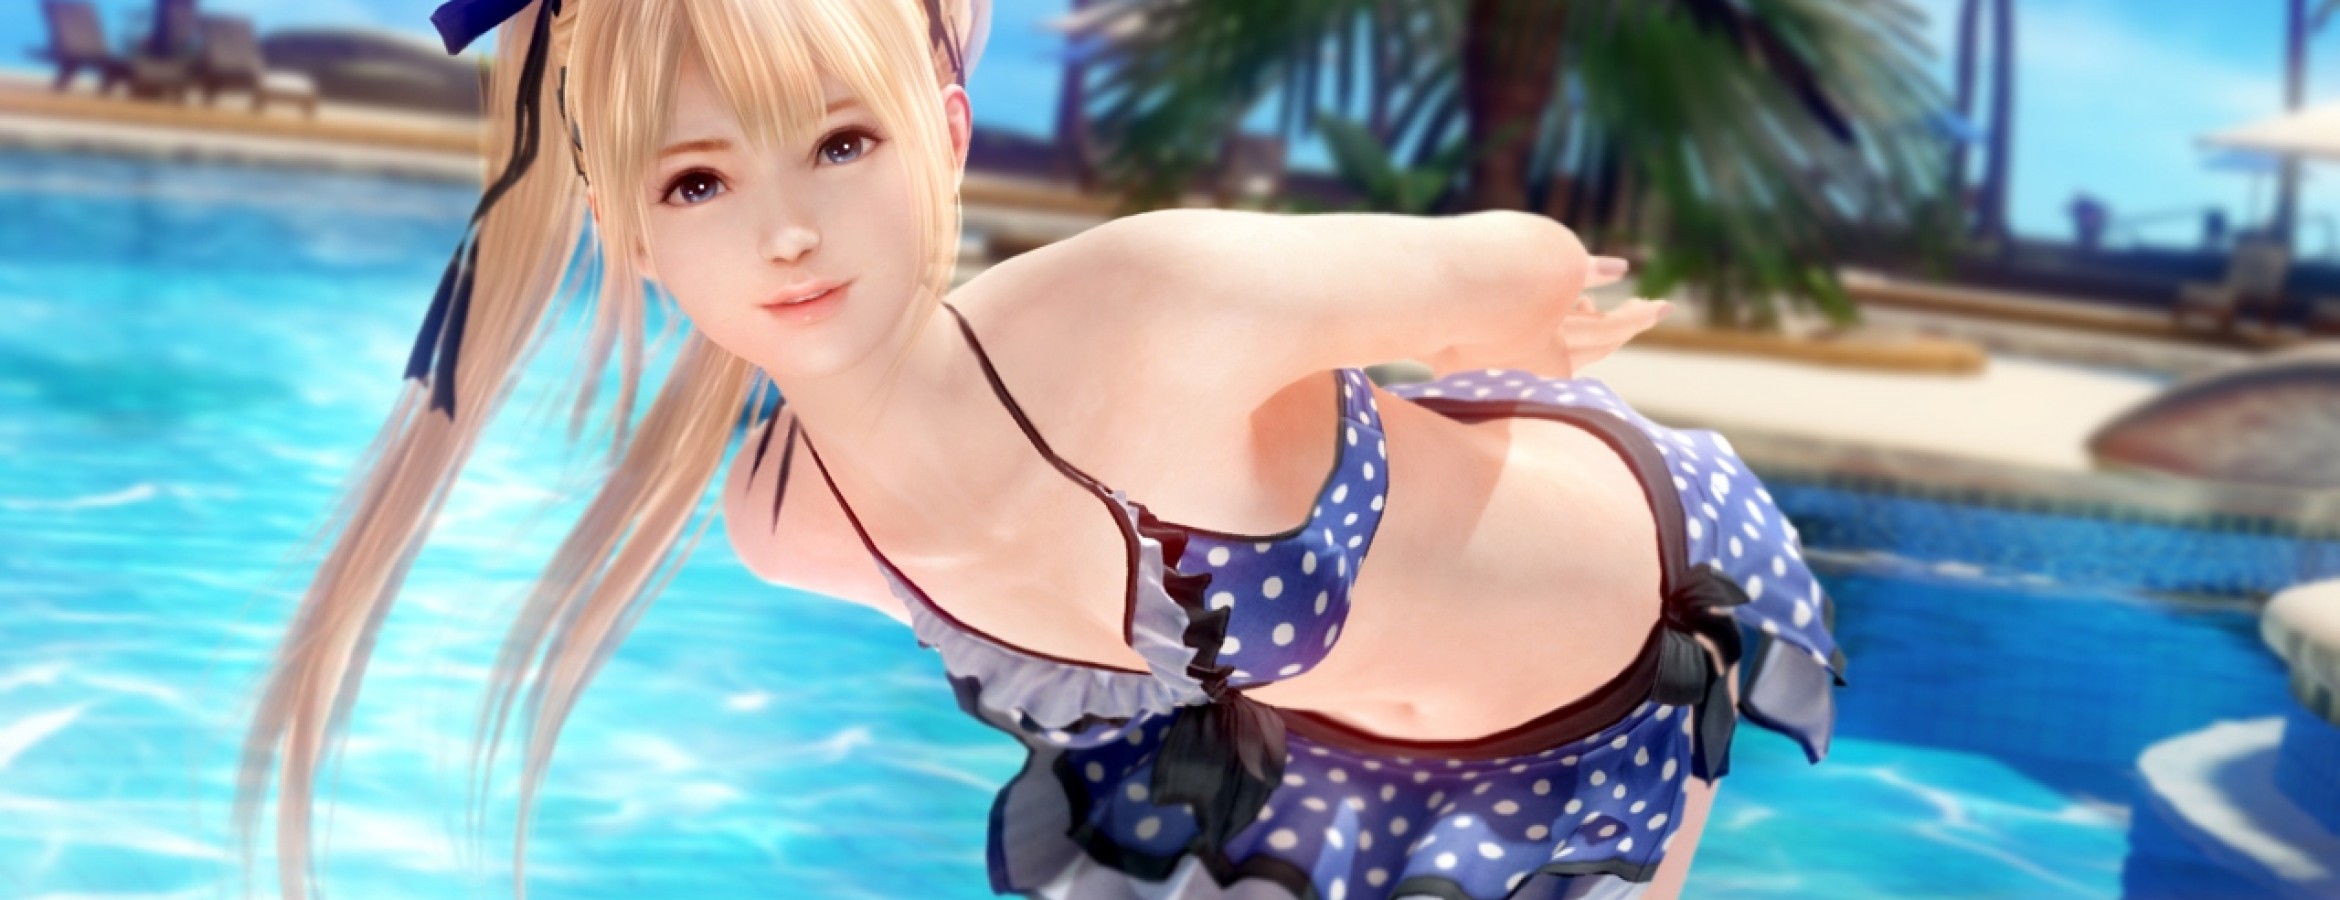 Nsfw games download. Dead or Alive Xtreme. Dead or Alive Xtreme 3 18. Dead or Alive Xtreme 3 Koei Tecmo. Dead or Alive Xtreme 3 Marie Rose.